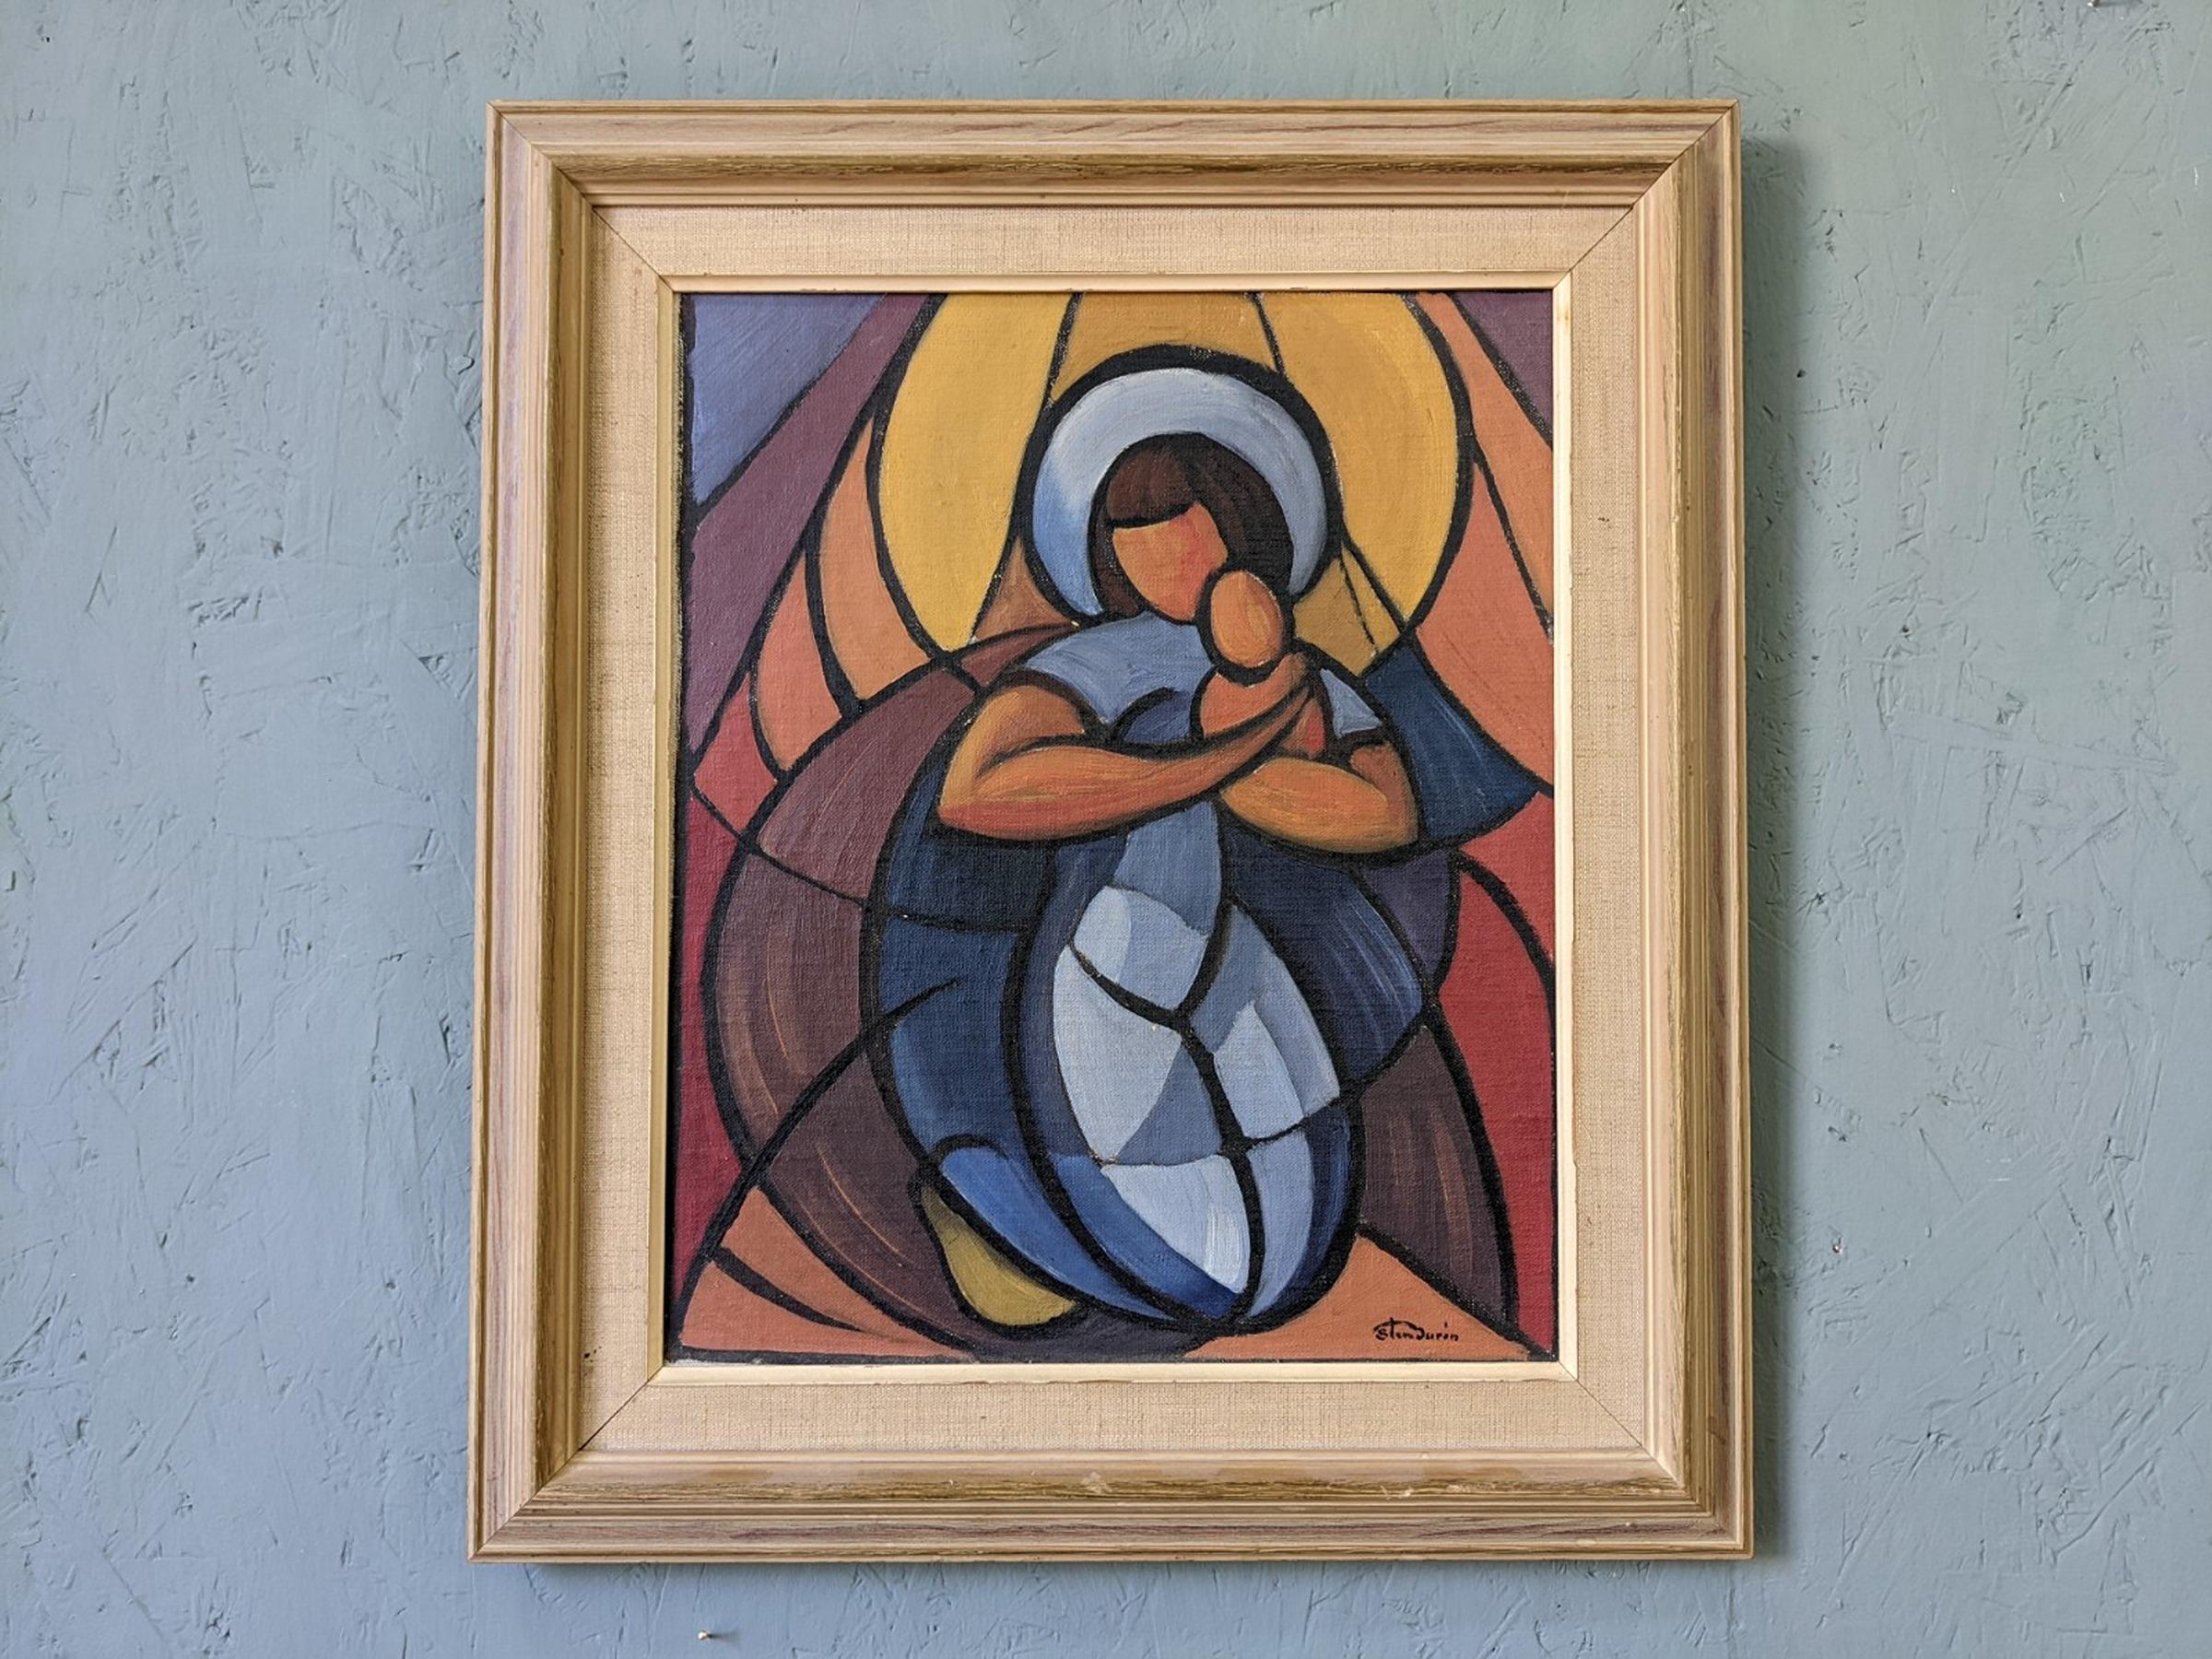 Vintage Mid-Century Framed Cubist Abstract Oil Painting - Madonna & Child - Brown Figurative Painting by Unknown